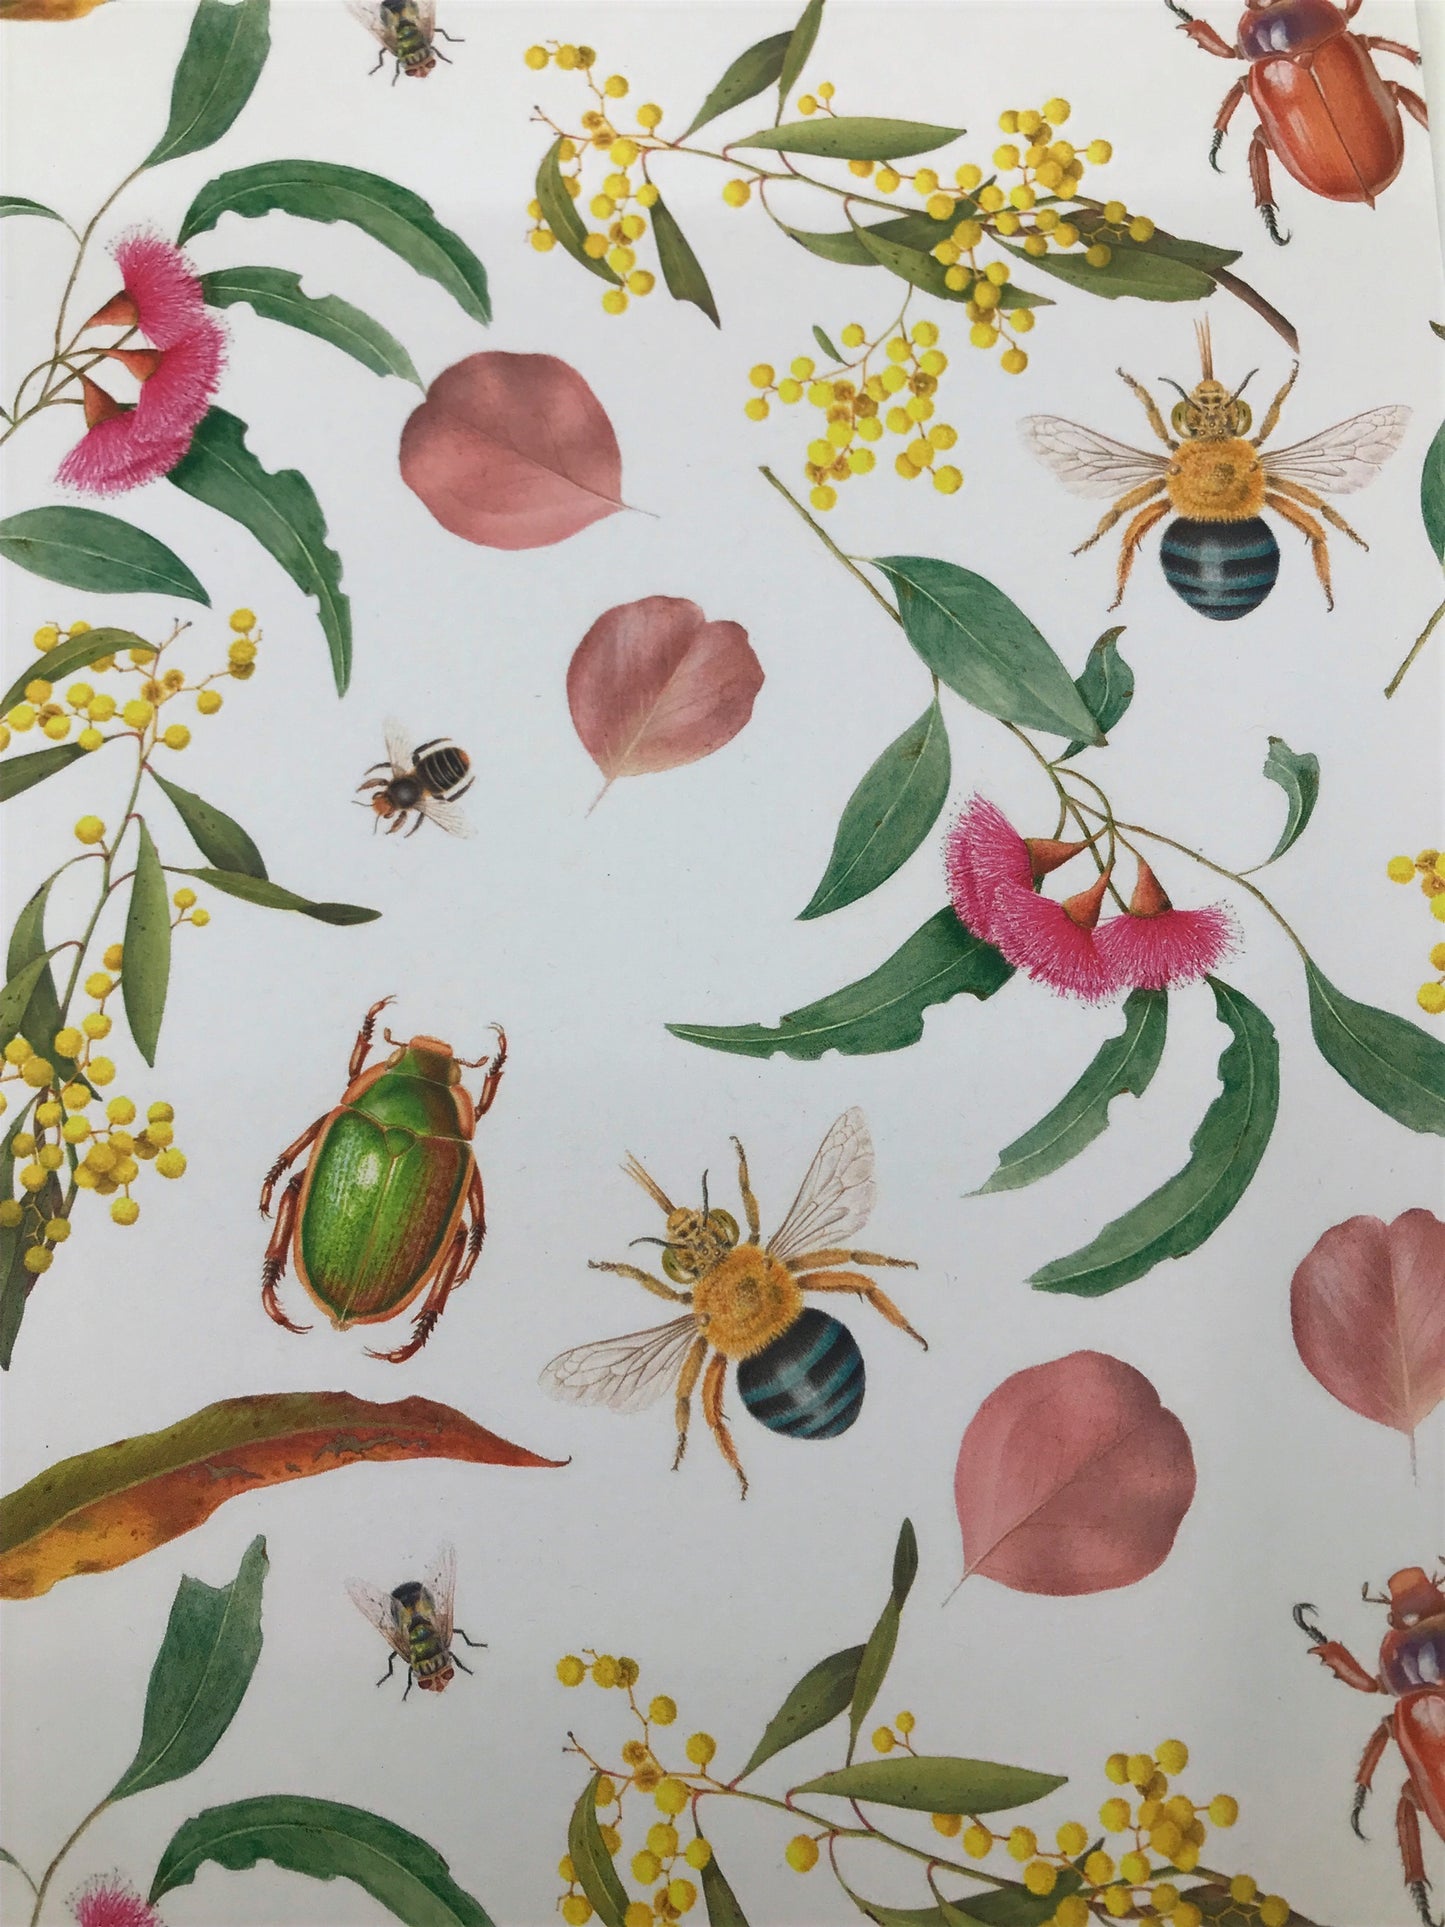 Plants and Insects of Australia Wrapping Paper